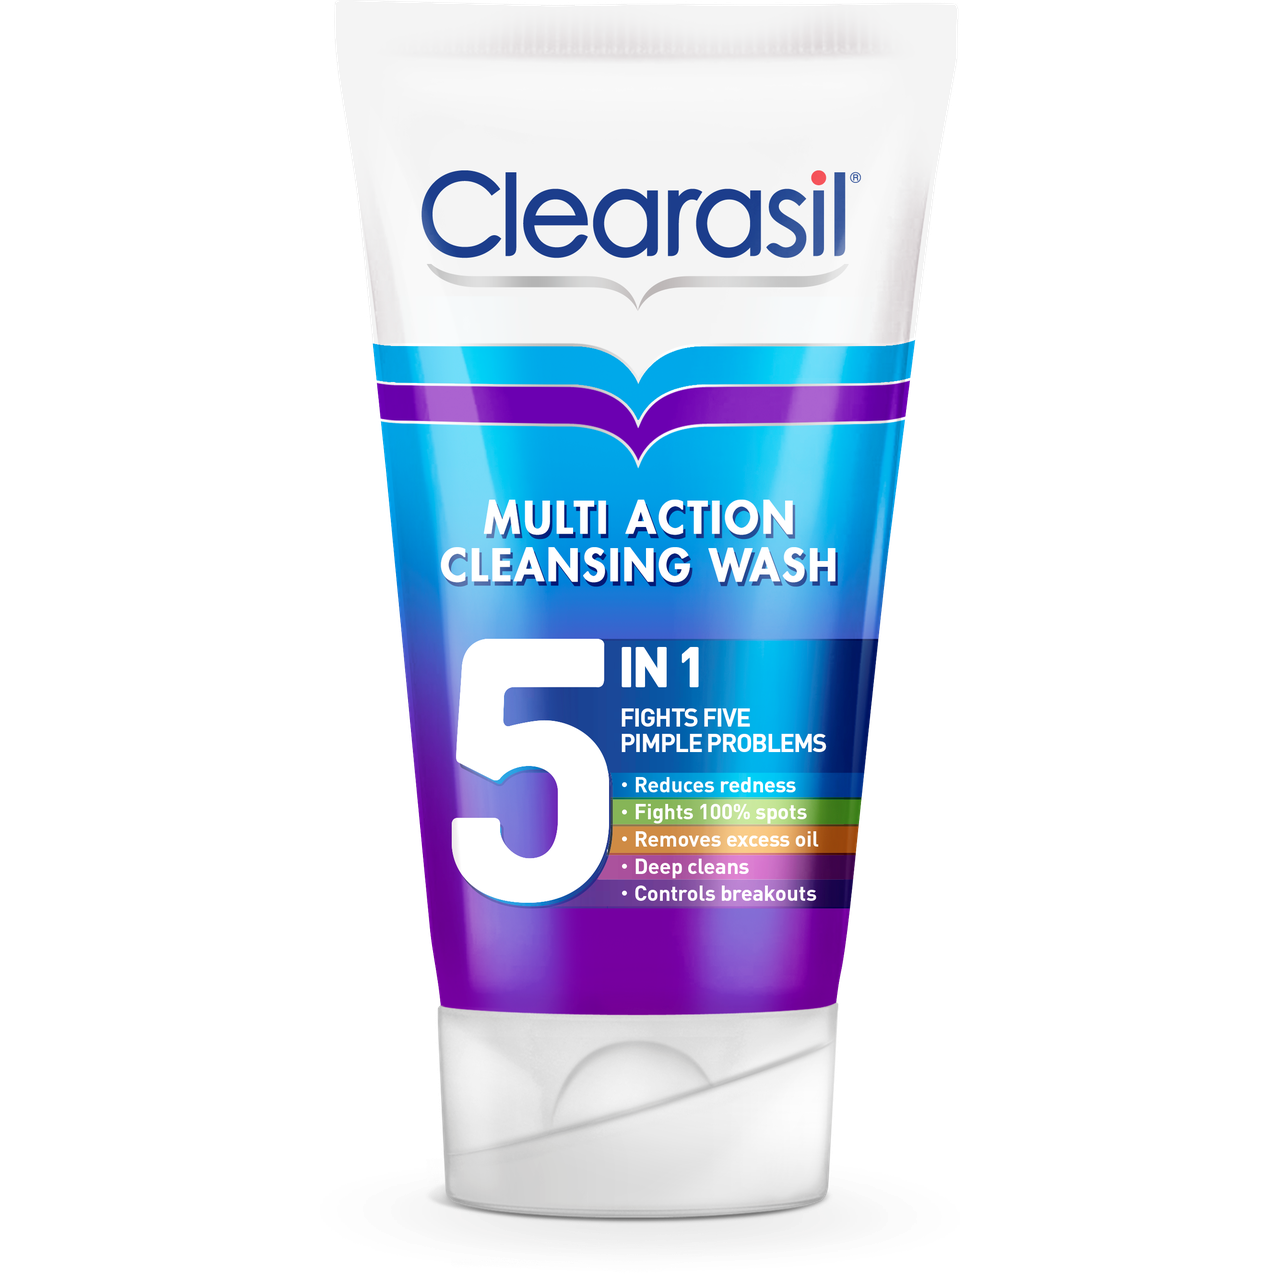 Clearasil® Multi Action 5 in 1 Cleansing Wash